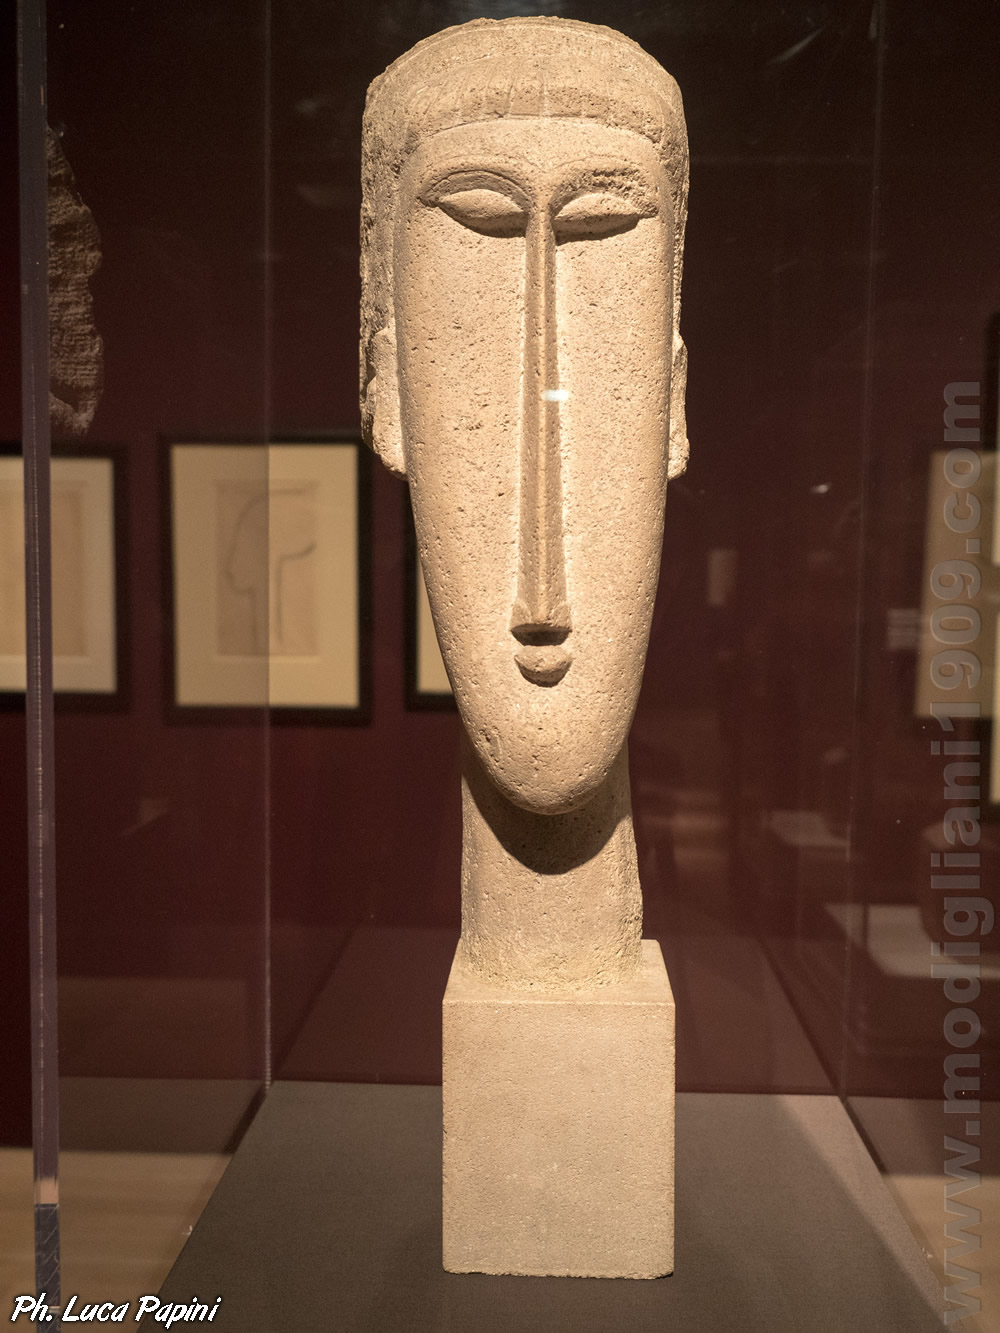 Woman's head, Amedeo Modigliani, 1911 - 1912, Limestone, National Gallery of Art, Washington, D.C. (Chester Dale Collection)